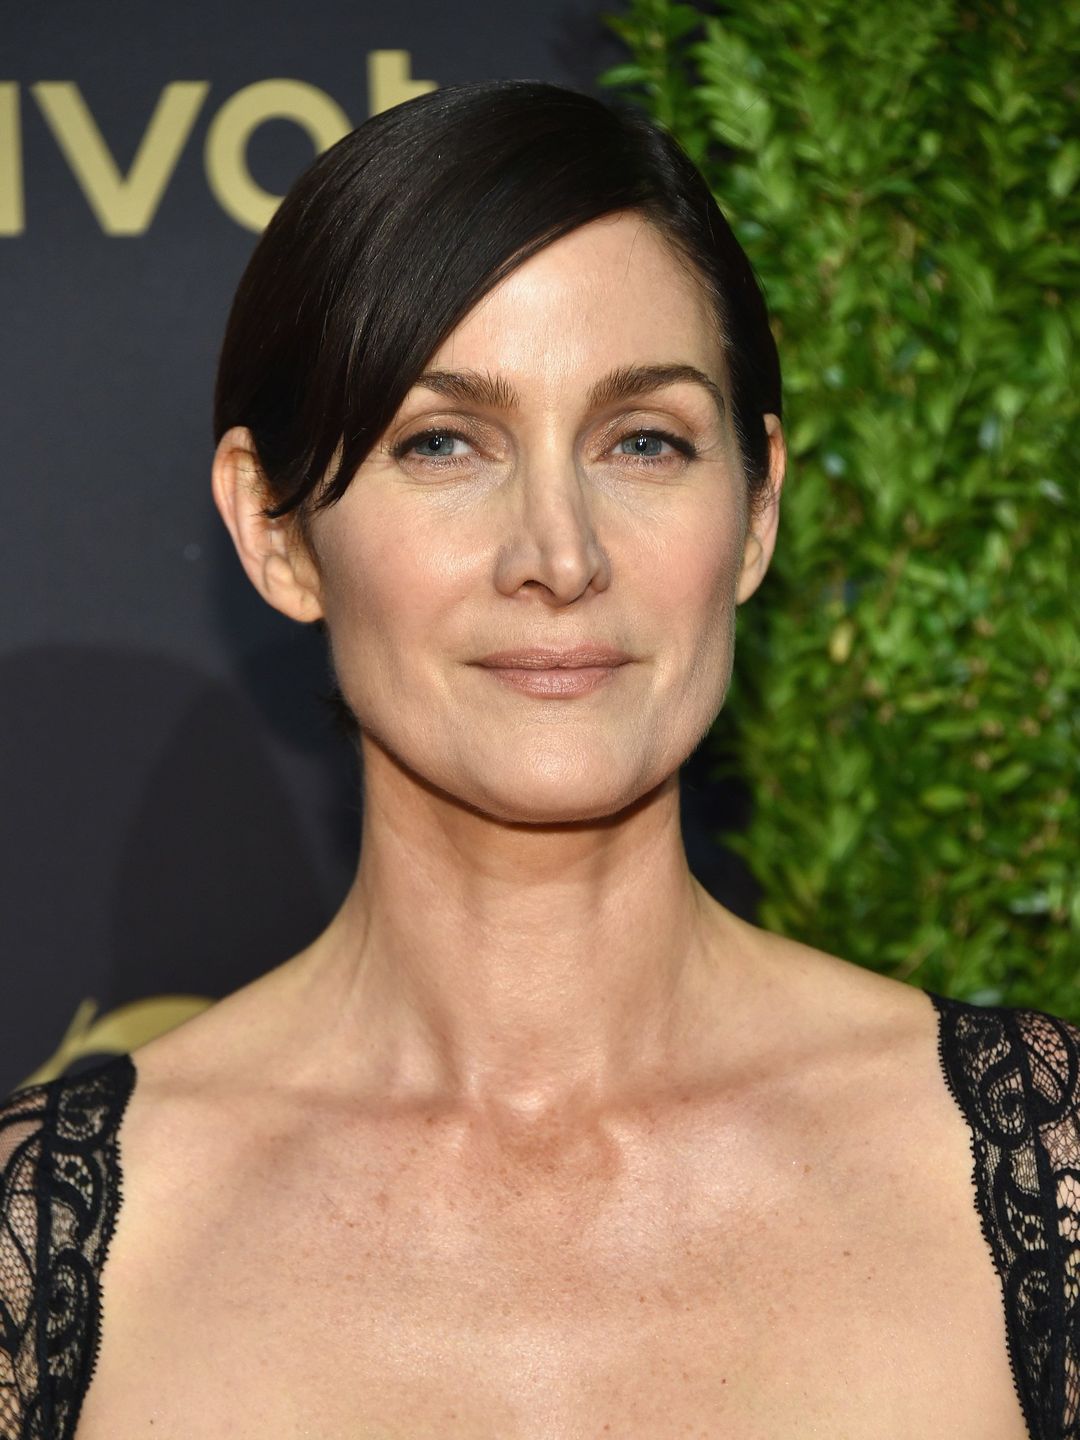 Carrie-Anne Moss family